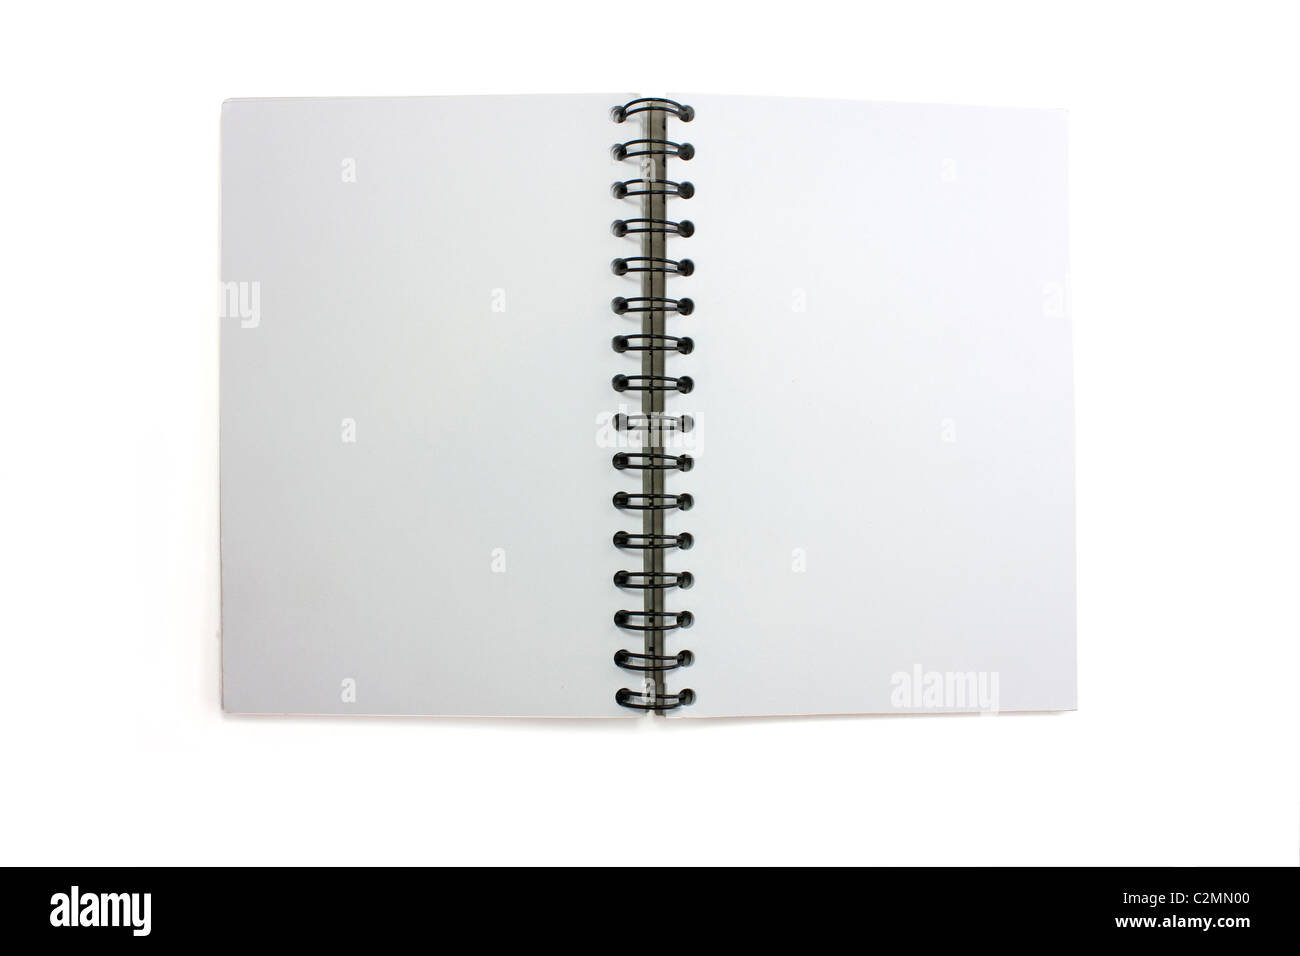 https://c8.alamy.com/comp/C2MN00/photo-of-an-open-isolated-sketchbook-with-wirobound-spine-C2MN00.jpg